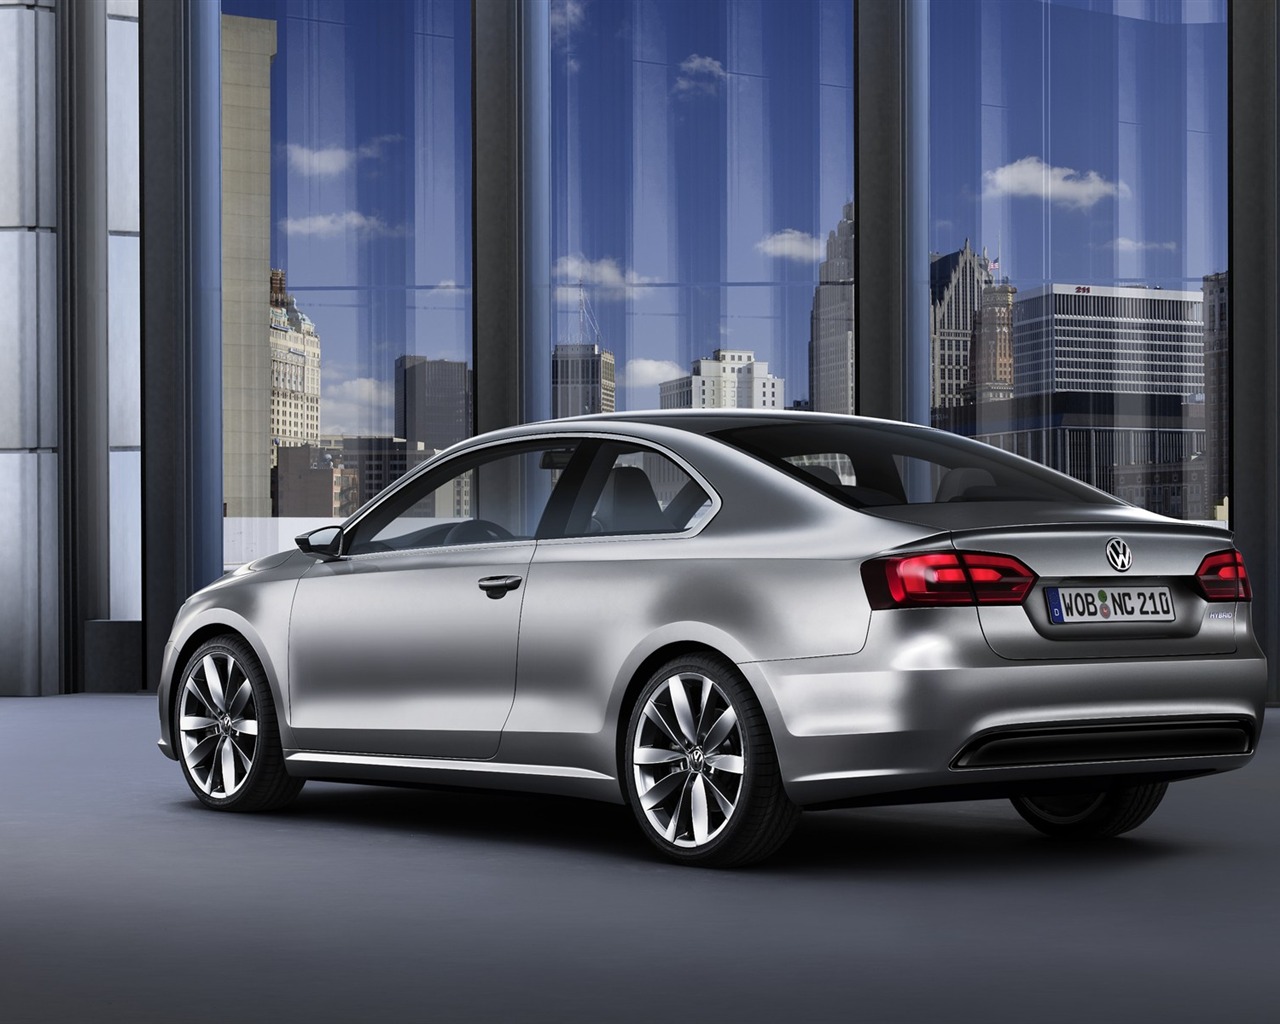 Volkswagen Concept Car tapety (2) #1 - 1280x1024